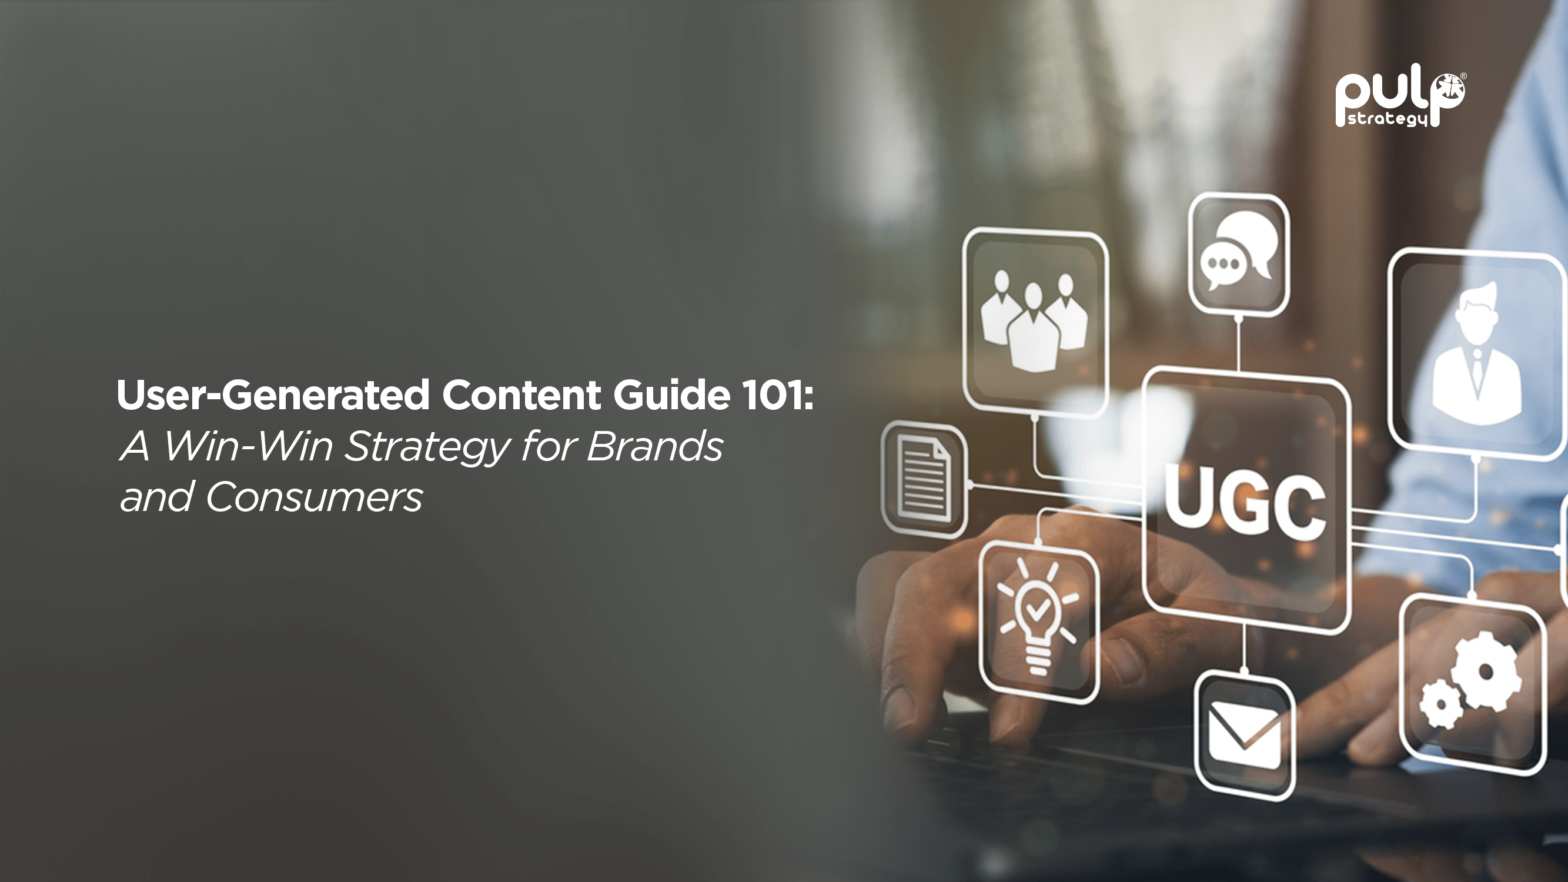 User-Generated Content Guide 101: A Win-Win Strategy for Brands and Consumers